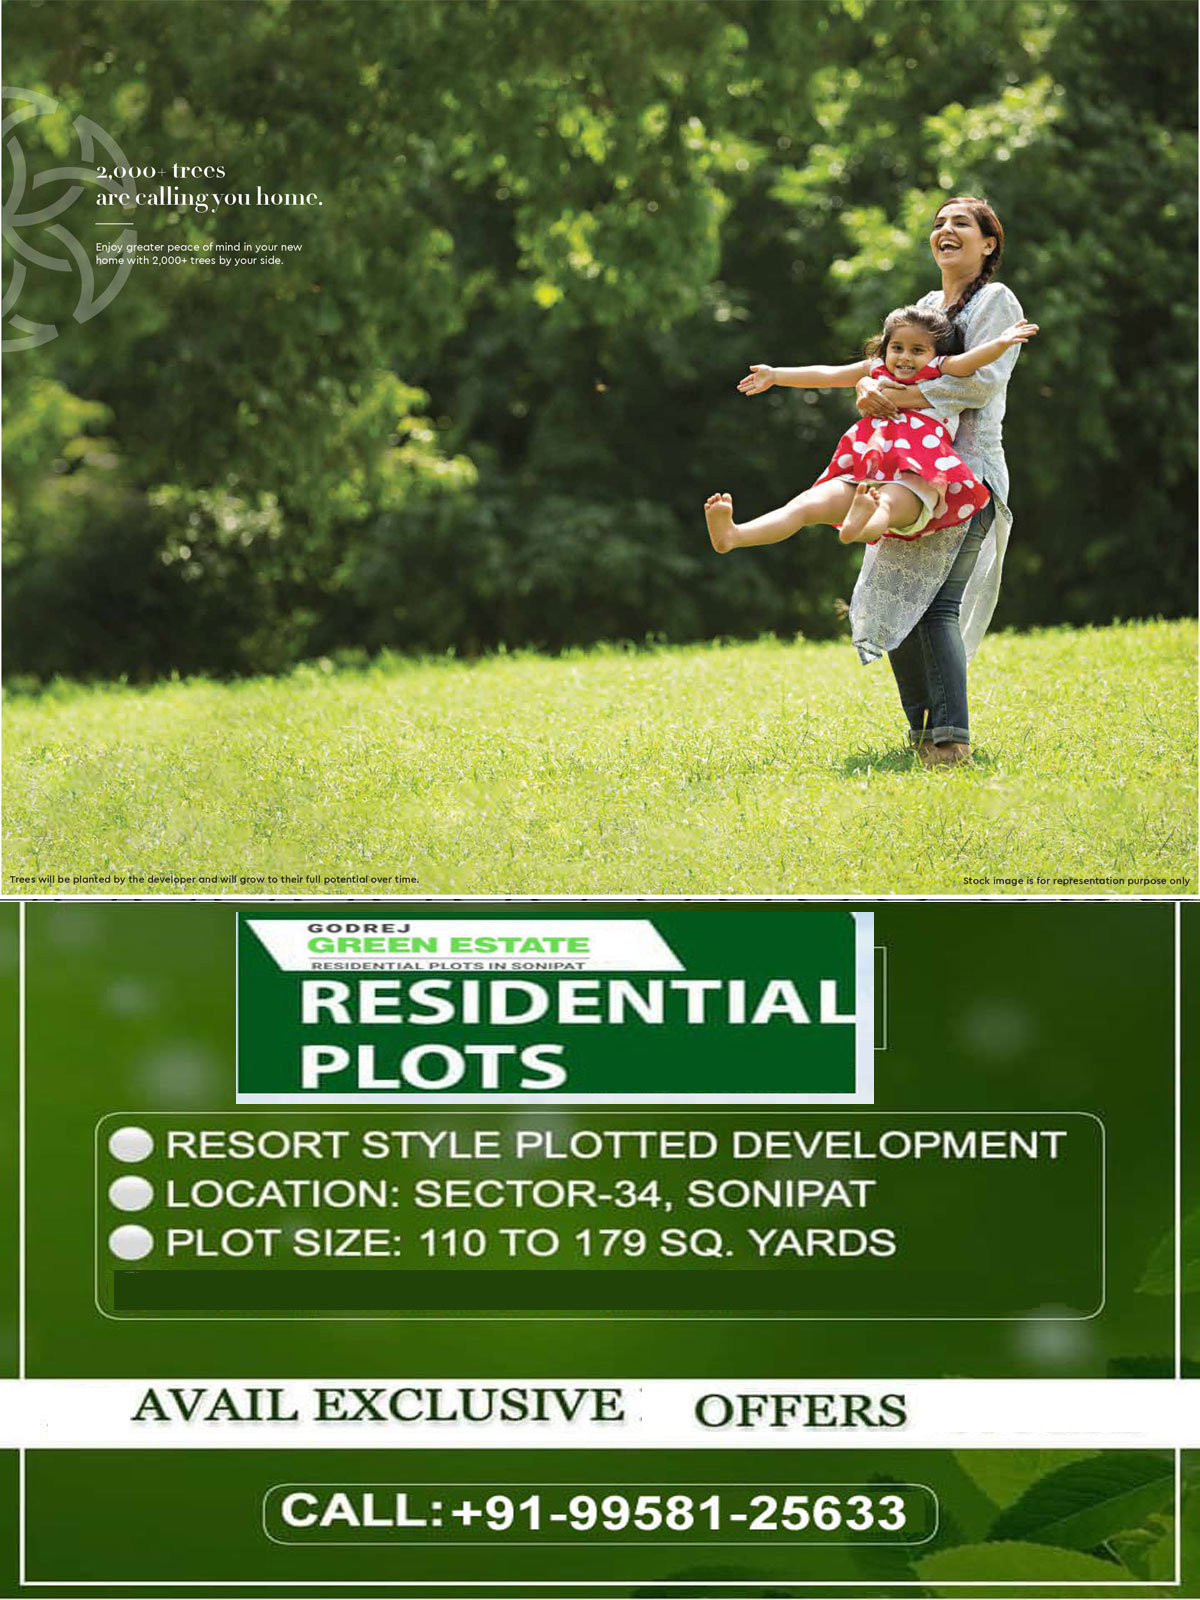 Book Your Residenial Plots in Godrej Green Estate Sonipat Project